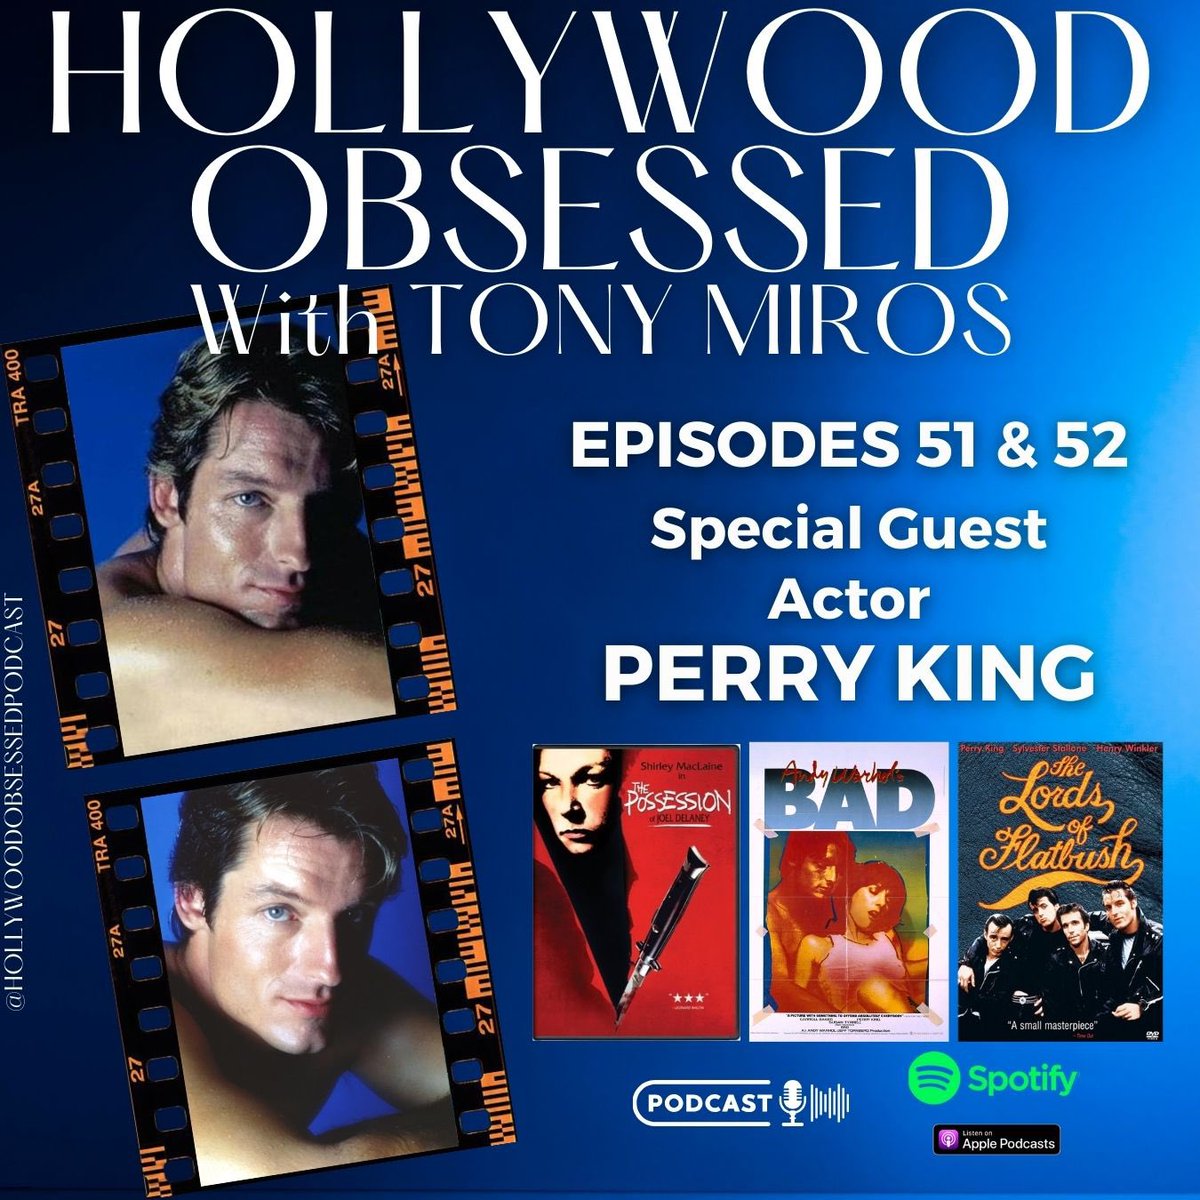 Have you listened to the two new episodes of @HLWDobsessed w legendary actor @theperryking yet? He tells host @tonymiros all about his film roles including #thelordsofflatbush & @TheDivideMovie! Listen now. #PerryKing 

hollywoodobsessedthepodcast.com/guests/perry-k…